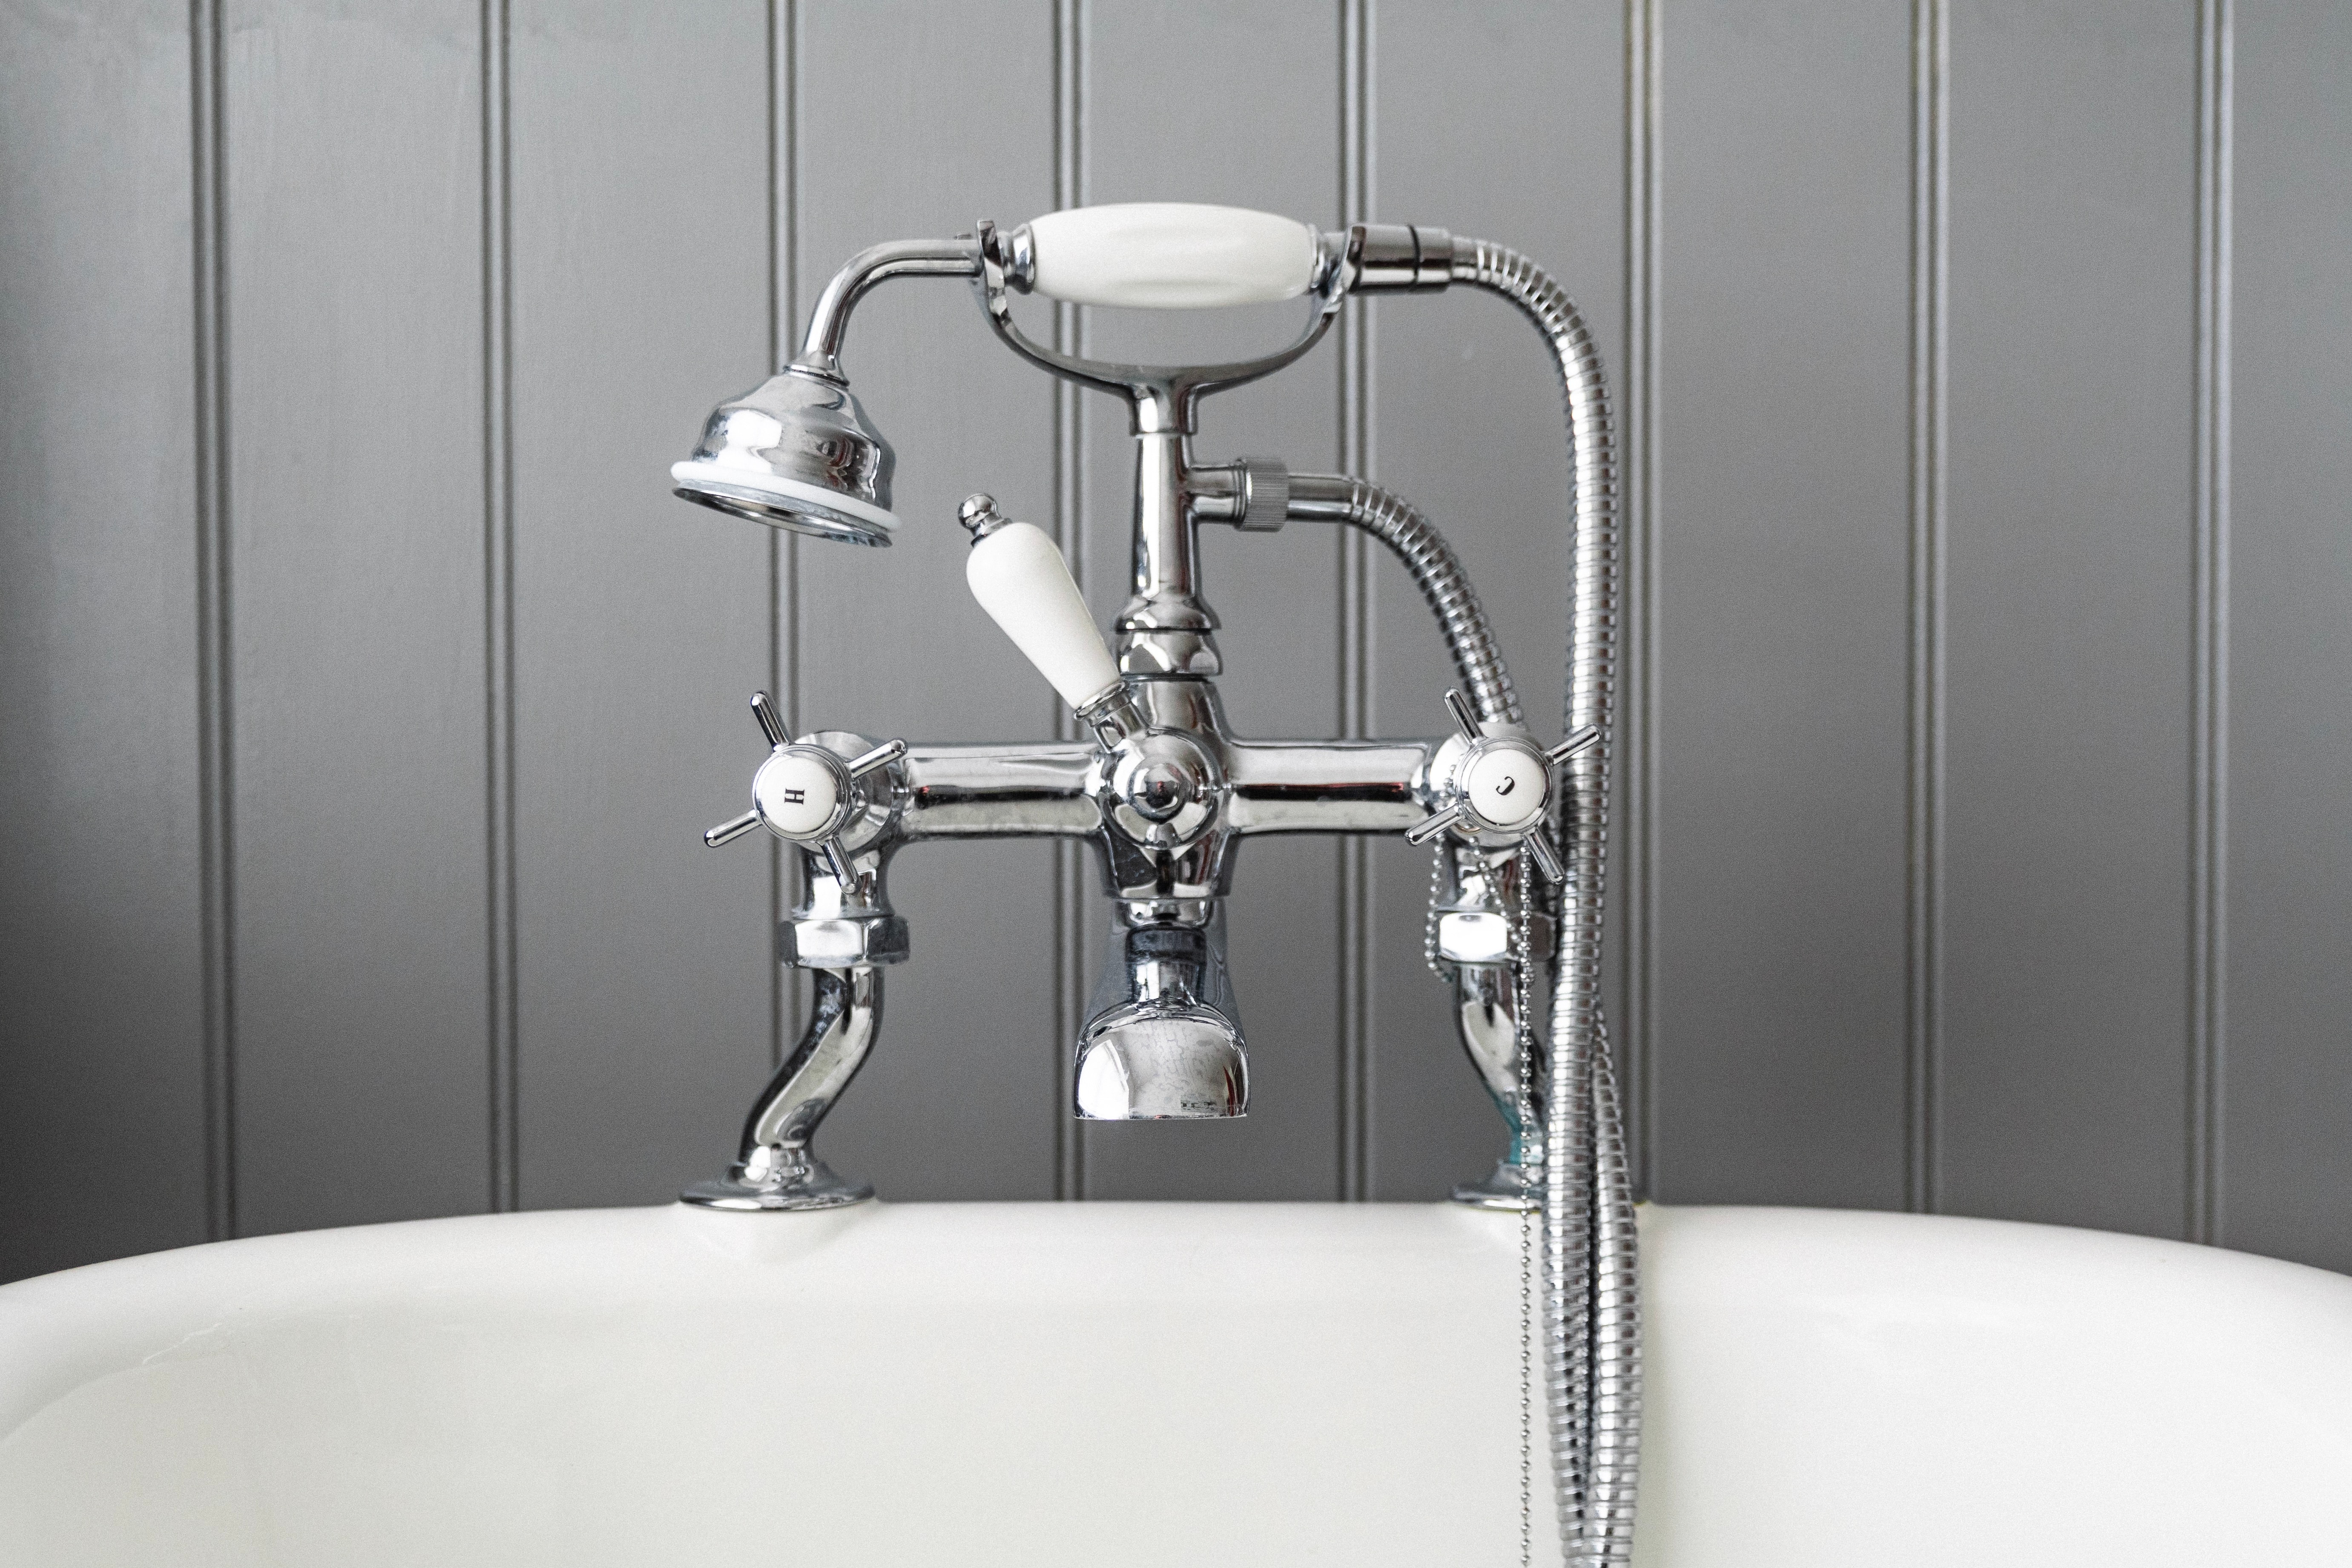 Bathroom Plumbing can take a major share of your total bathroom remodeling project.